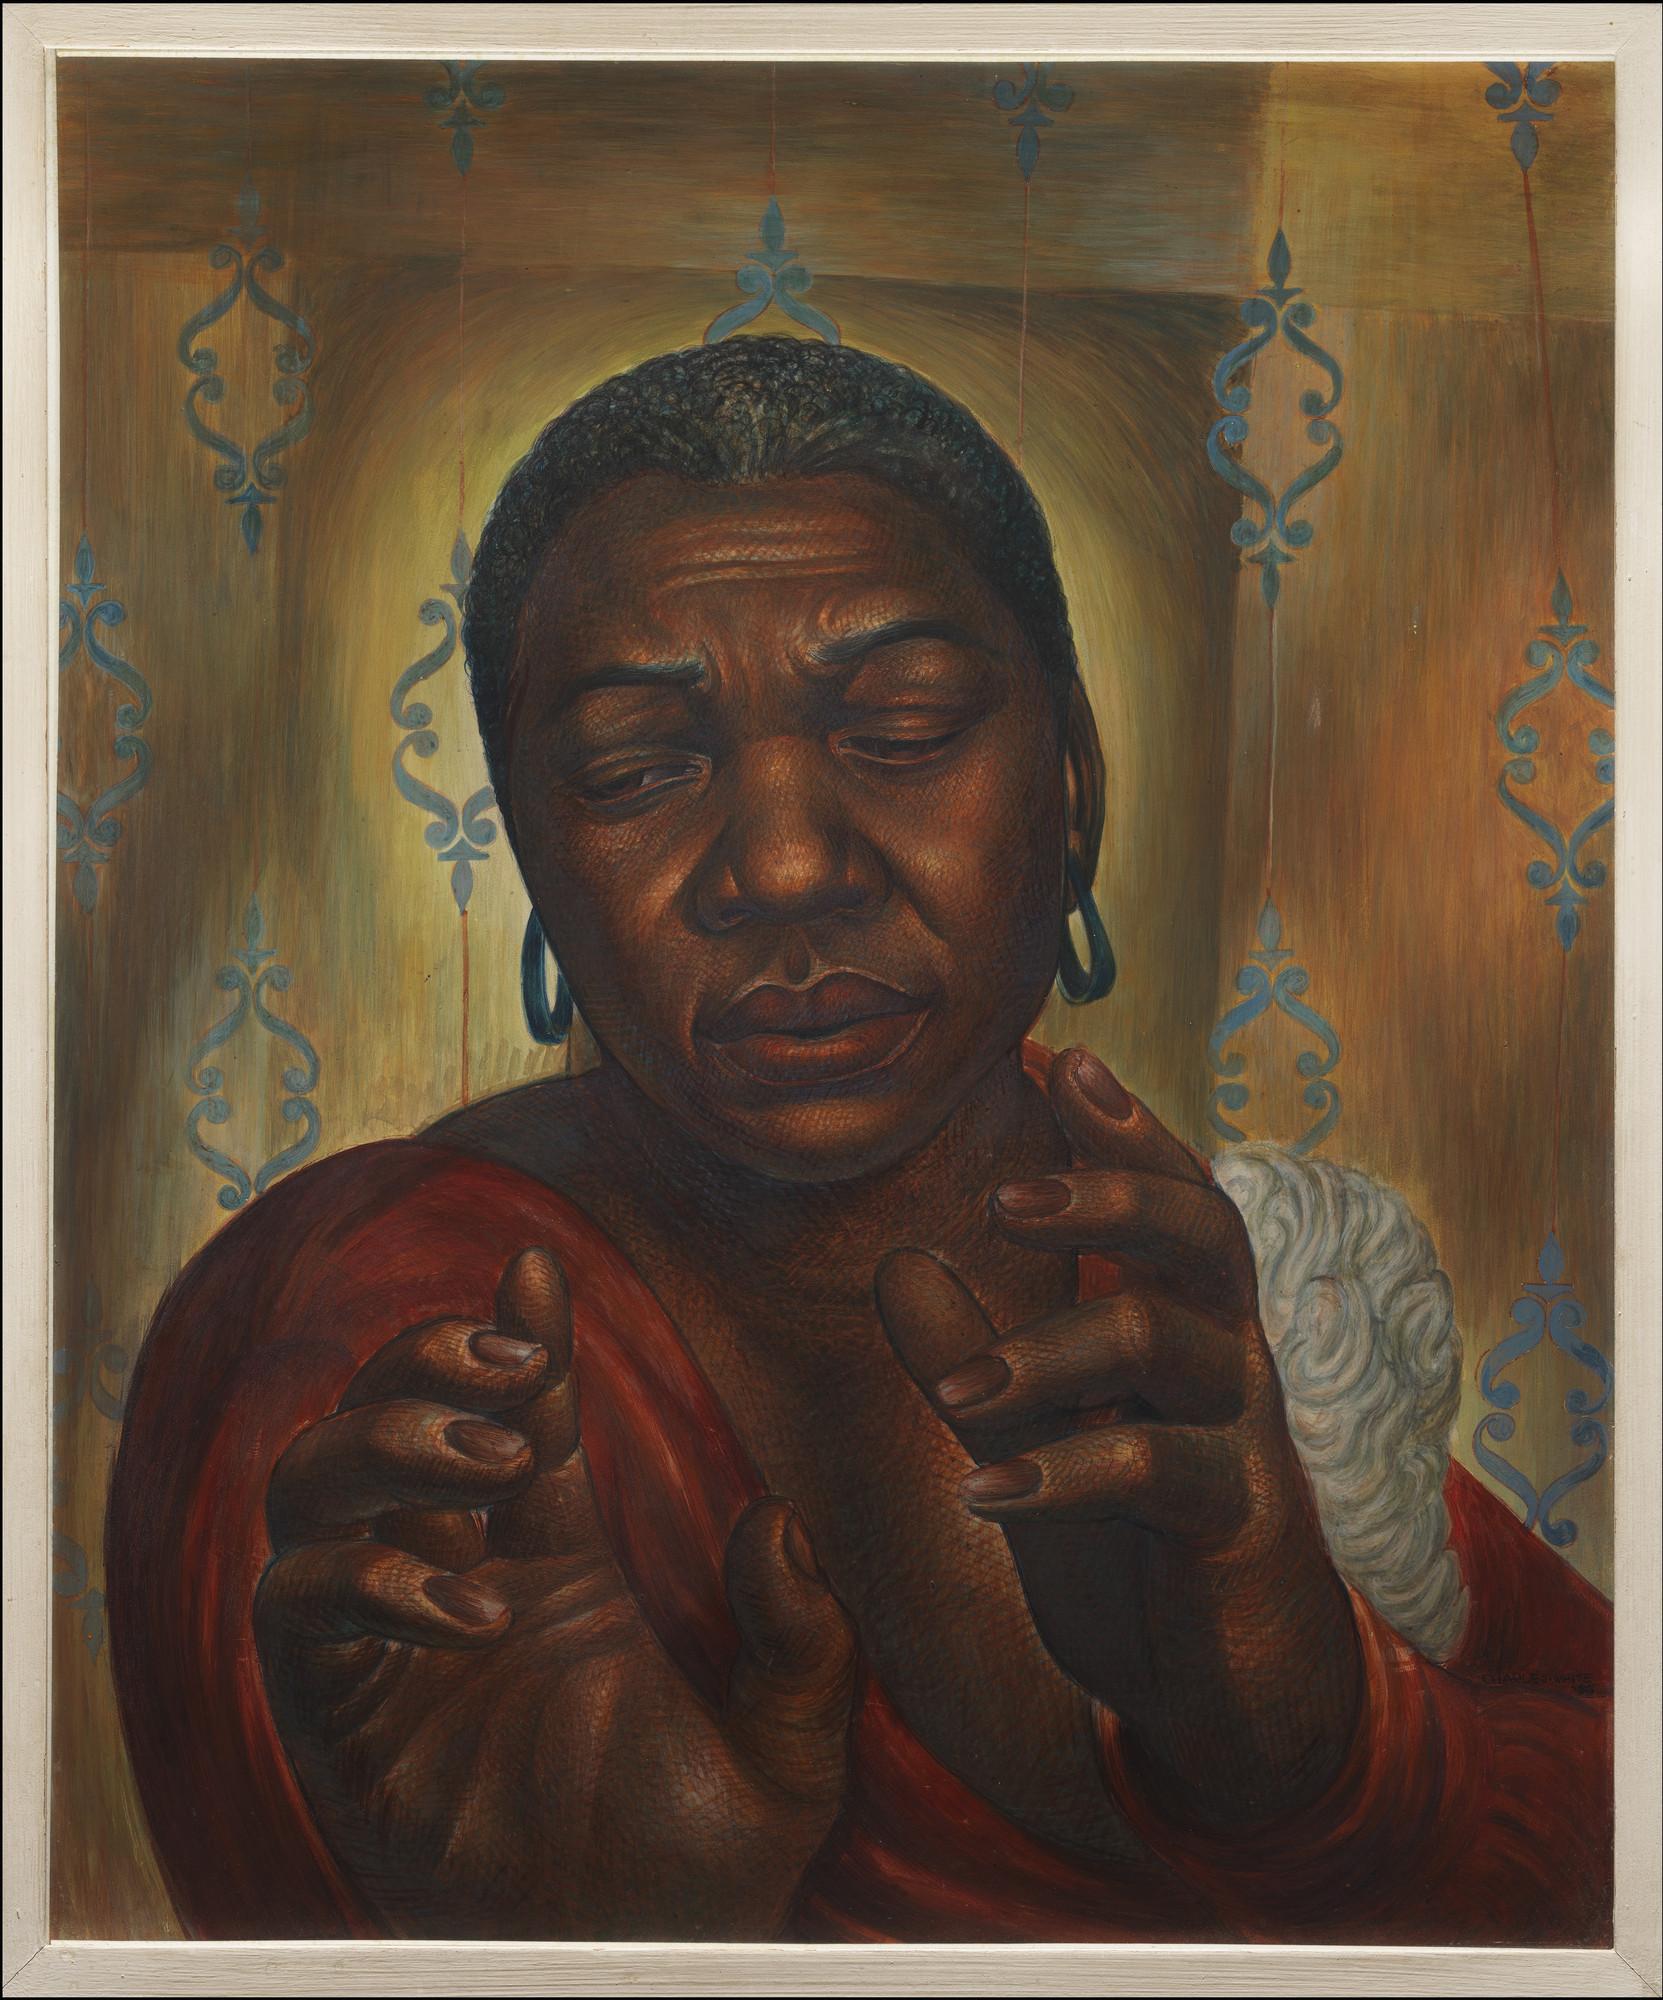 Charles White. _Bessie Smith_. 1950. Tempera on panel, 24 15/16 × 20" (63.3 × 50.8 cm). Private collection.
© The Charles White Archives/ Photo © Museum Associates/LACMA